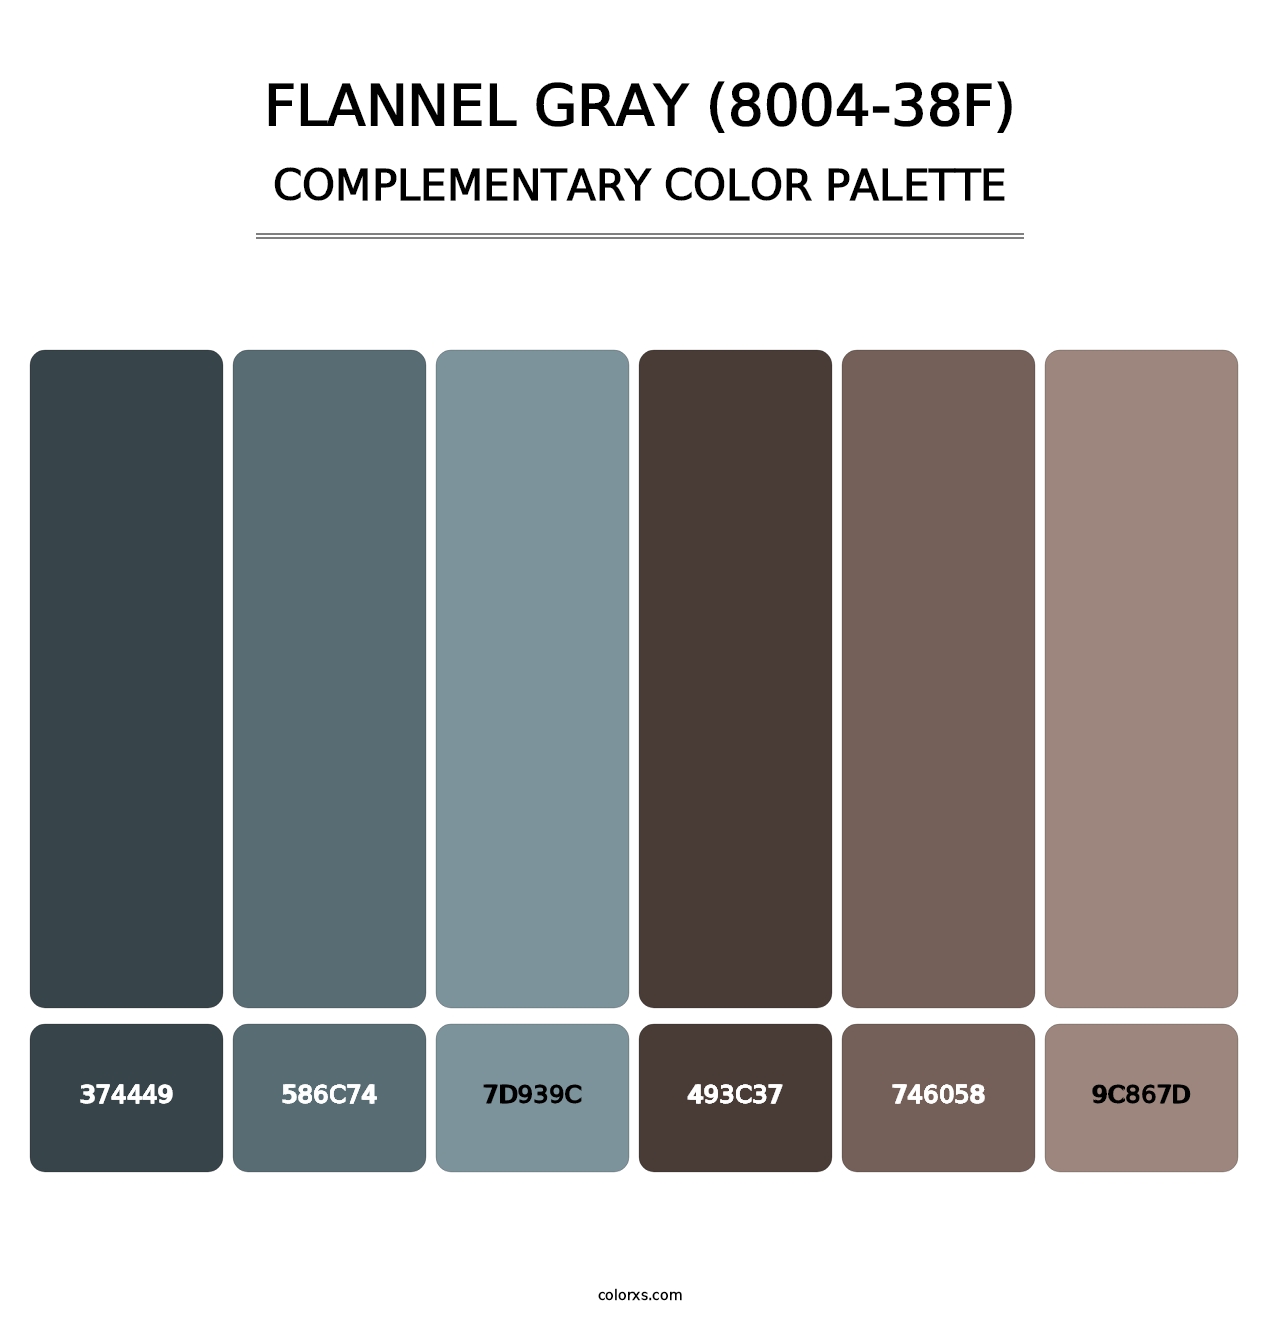 Flannel Gray (8004-38F) - Complementary Color Palette